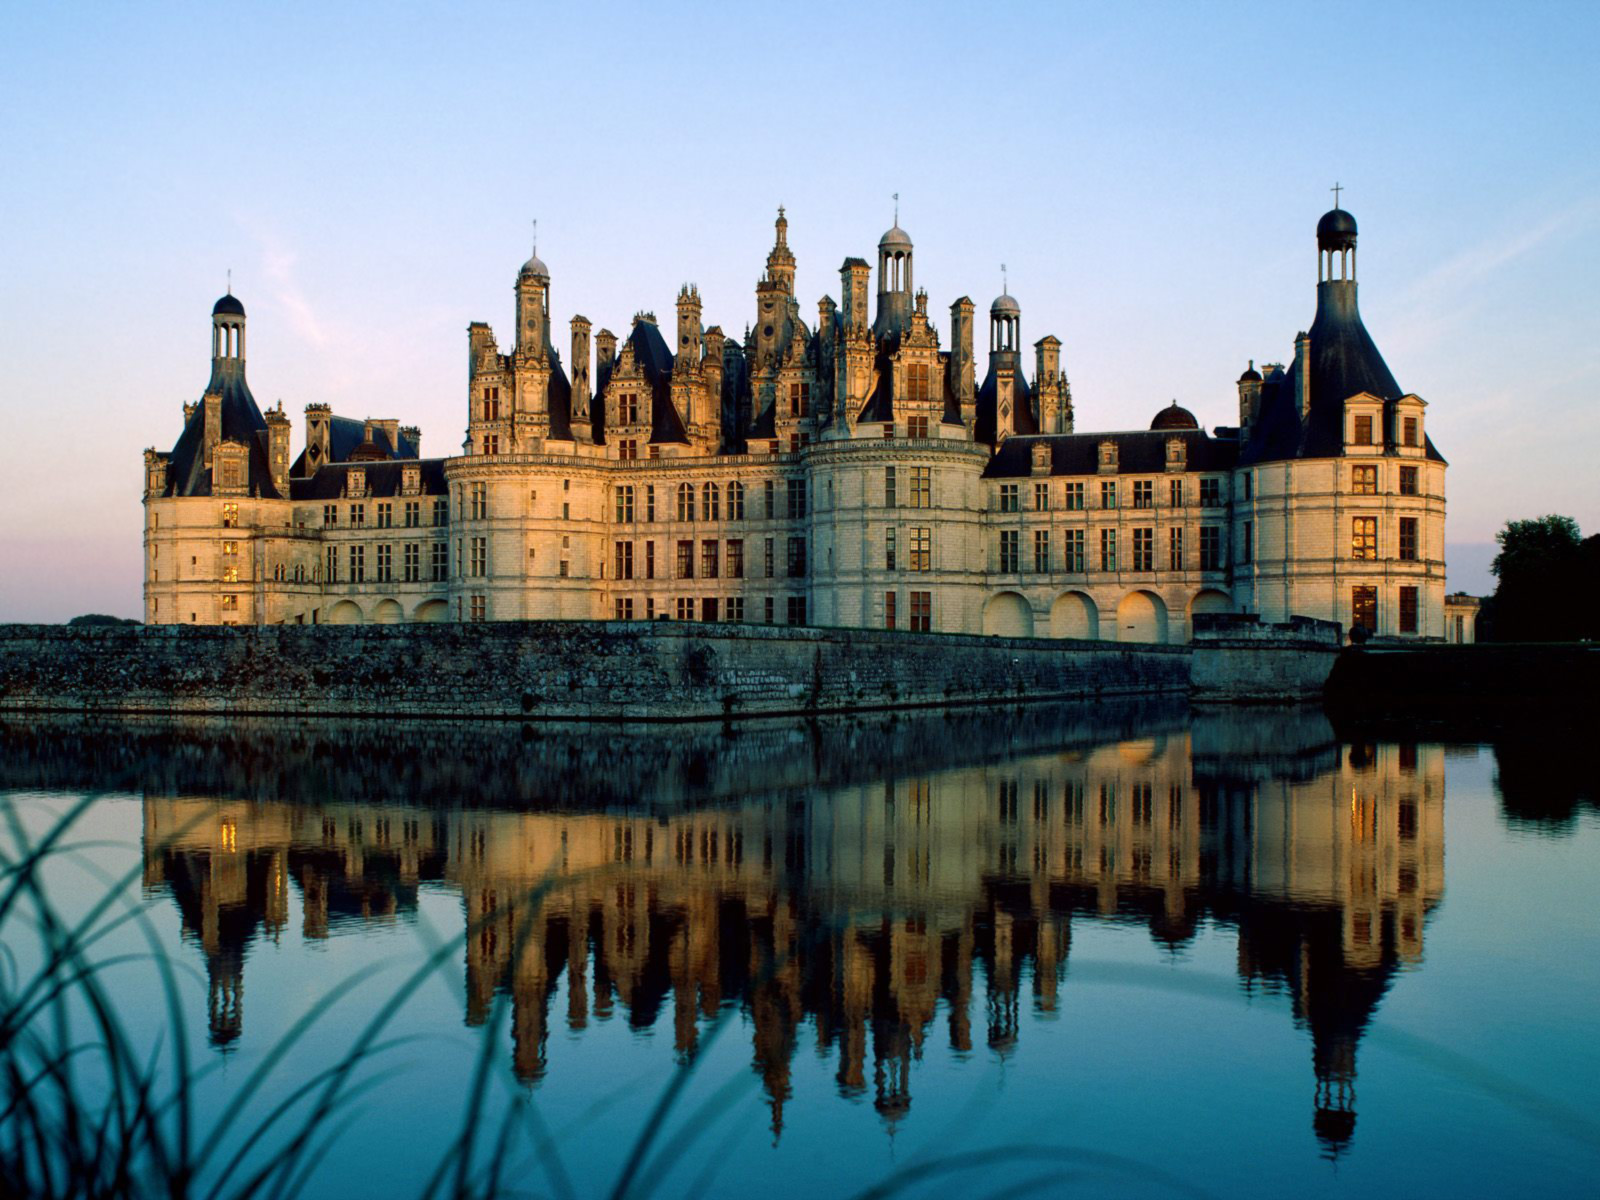 Chateau De Chambord France Post In Pixel Of 1600 10 Tall Buildings Fully Reflected In Clear Sea Naughty Ripples Are Around Hd Natural Scenery Wallpaper Free Wallpaper World